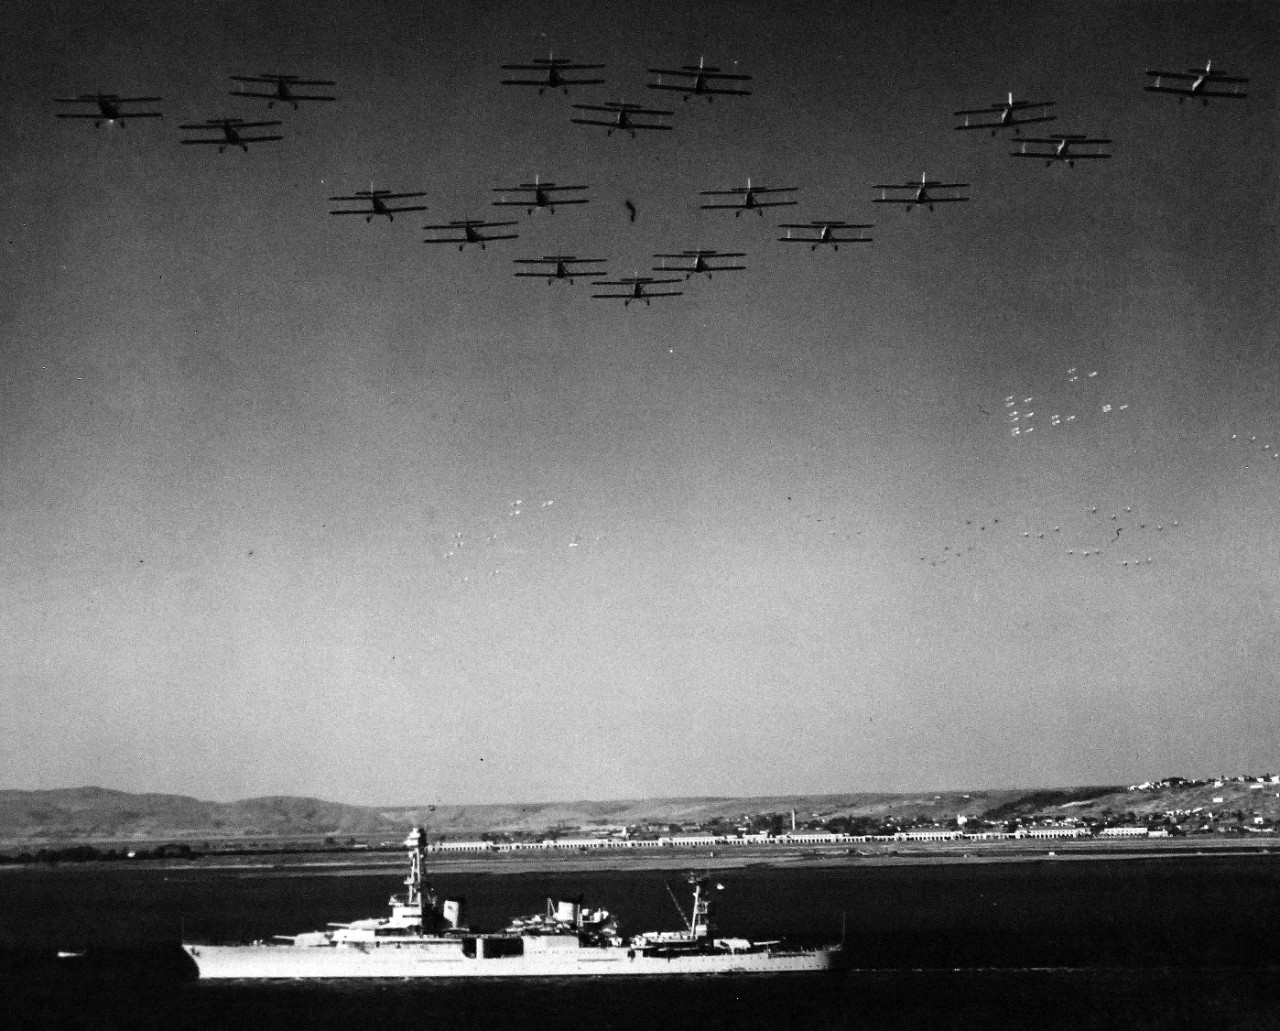 <p>80-CF-393-11: USS Houston (CA 30) leaving San Diego, California, with President Franklin D. Roosevelt and Admiral J.M. Reeves, Commander in Chief, U.S. Fleet on board to review fleet maneuvers at sea, October 2, 1935.&nbsp;</p>
